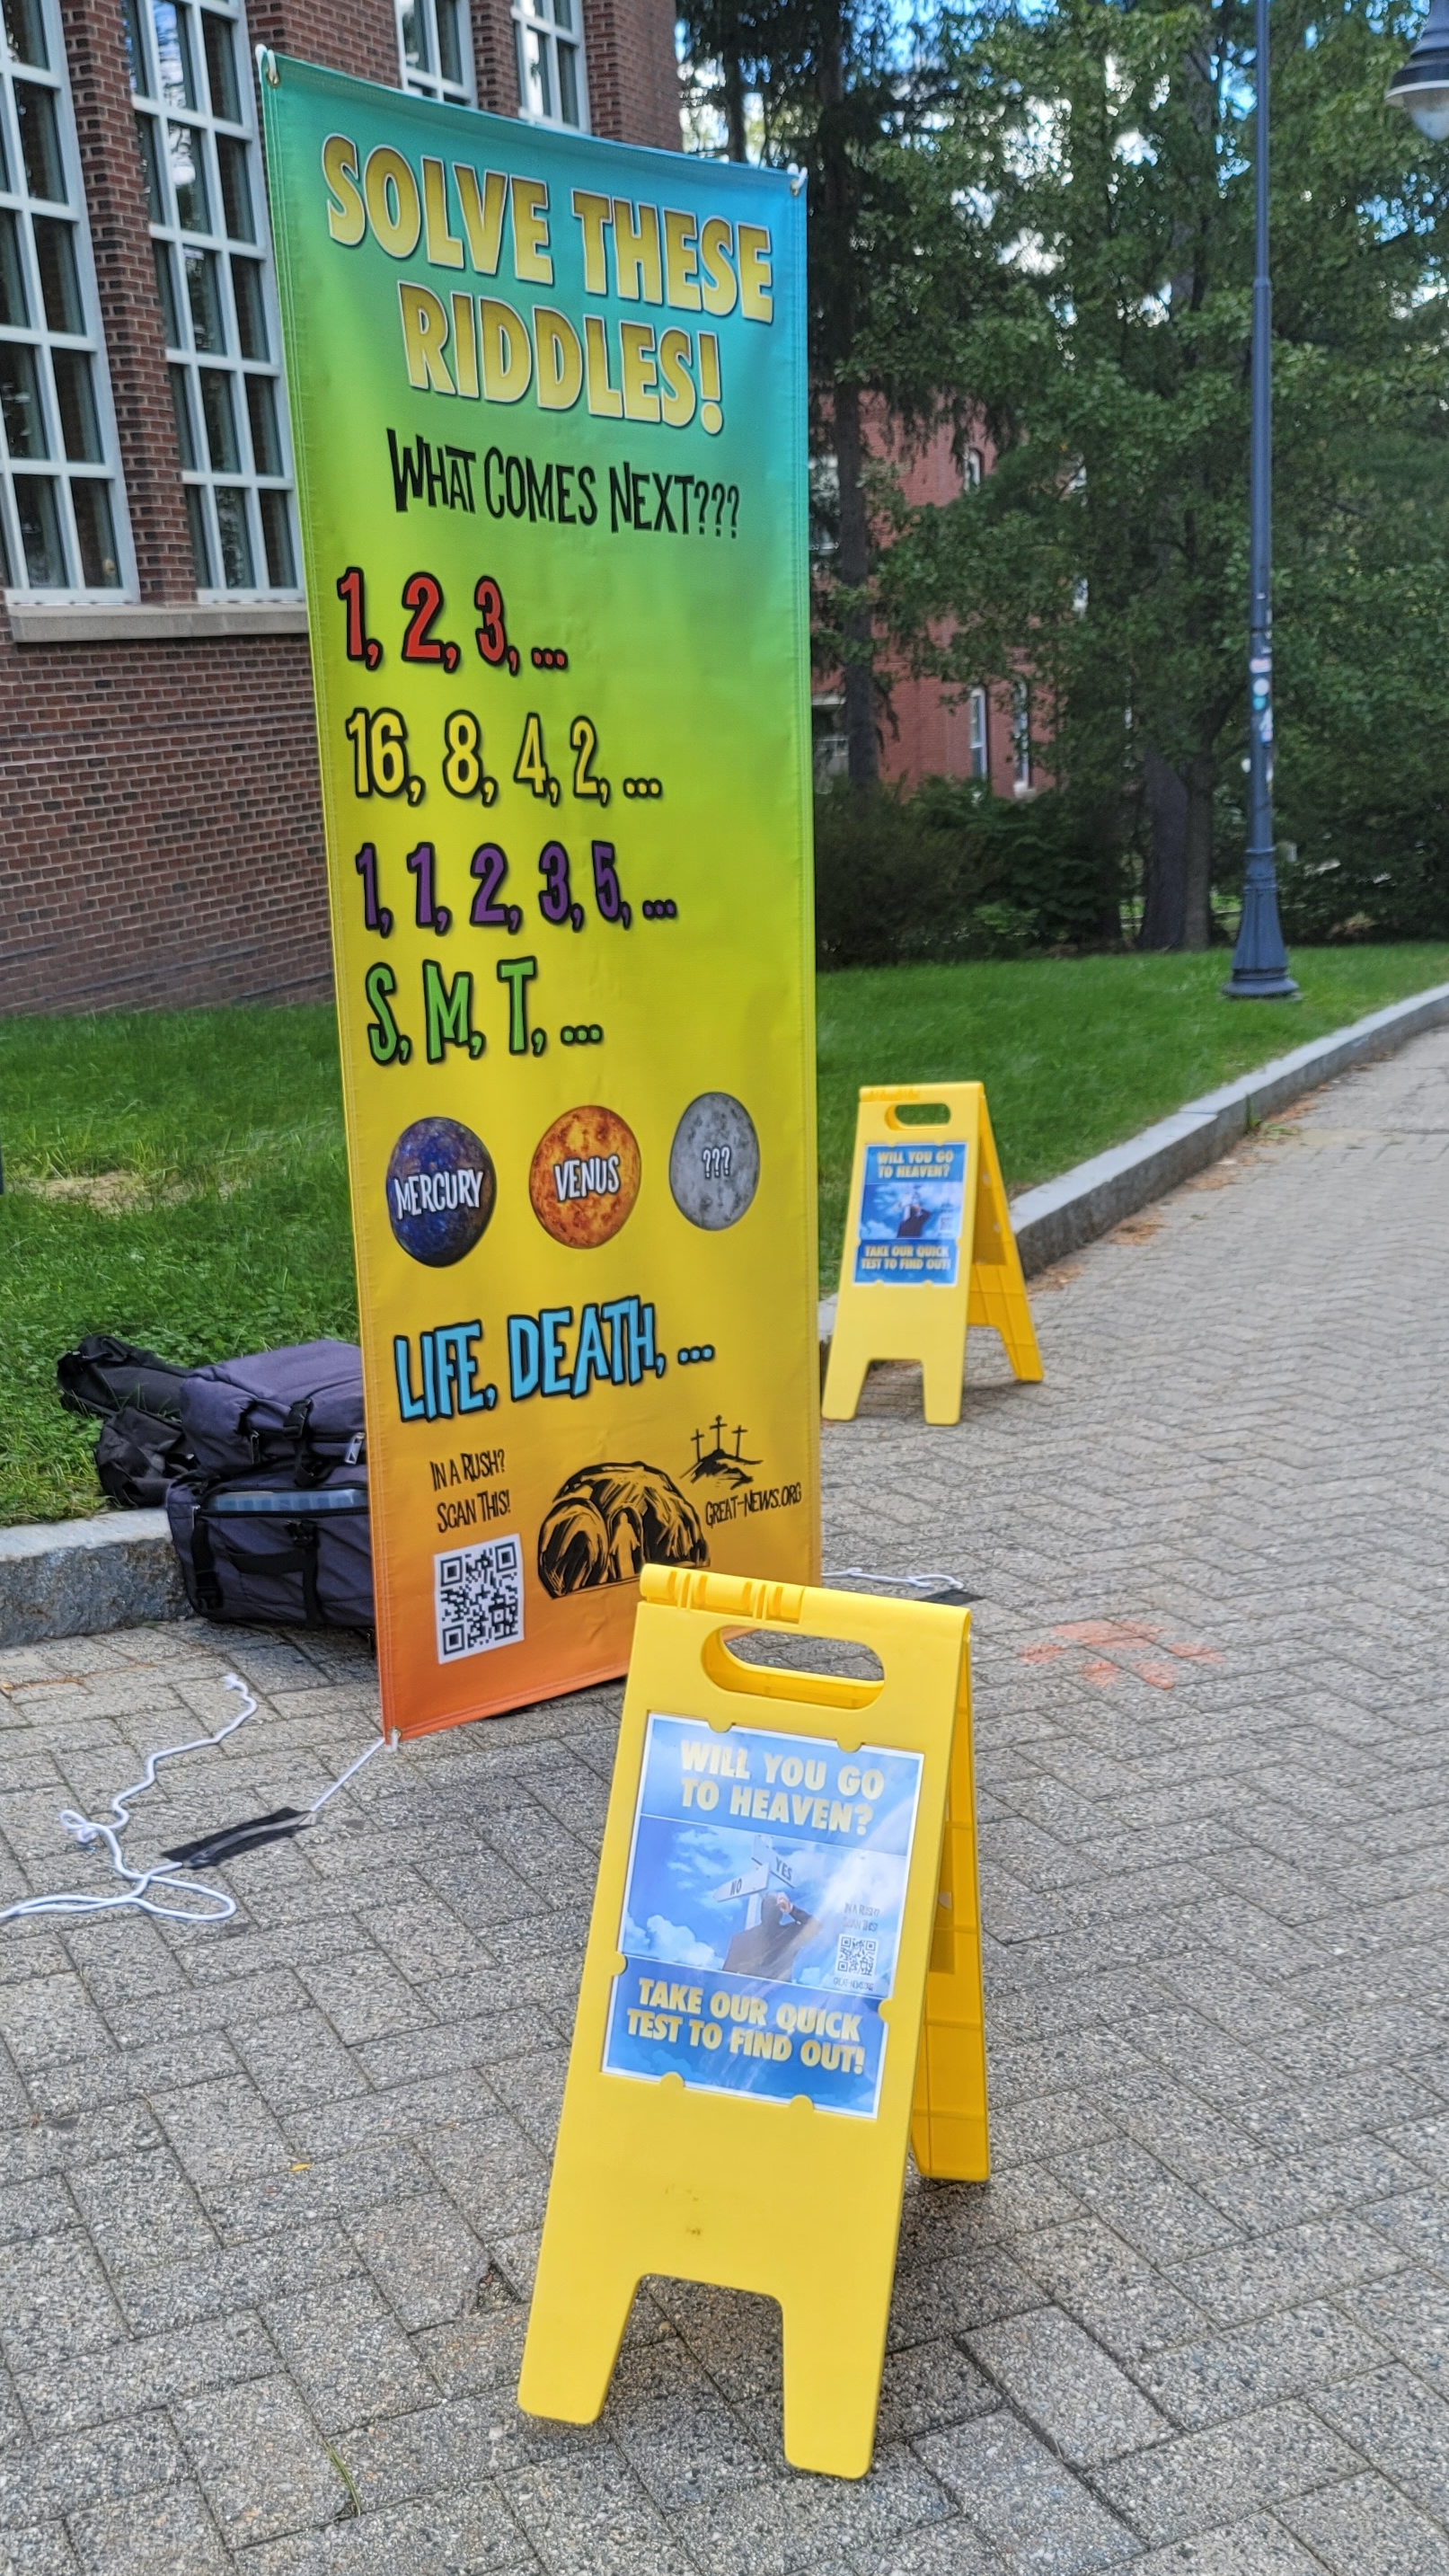 This is how we setup on campus. Many students stop to check out the large banner with the riddles. And the smaller A-Frame signs are helpful too.  All of them have "QR" codes on them, so if a student scans it with their phone, it will take them to our evangelistic website, https://great-news.org.   It's not at all uncommon for us to see students scanning the QR code.